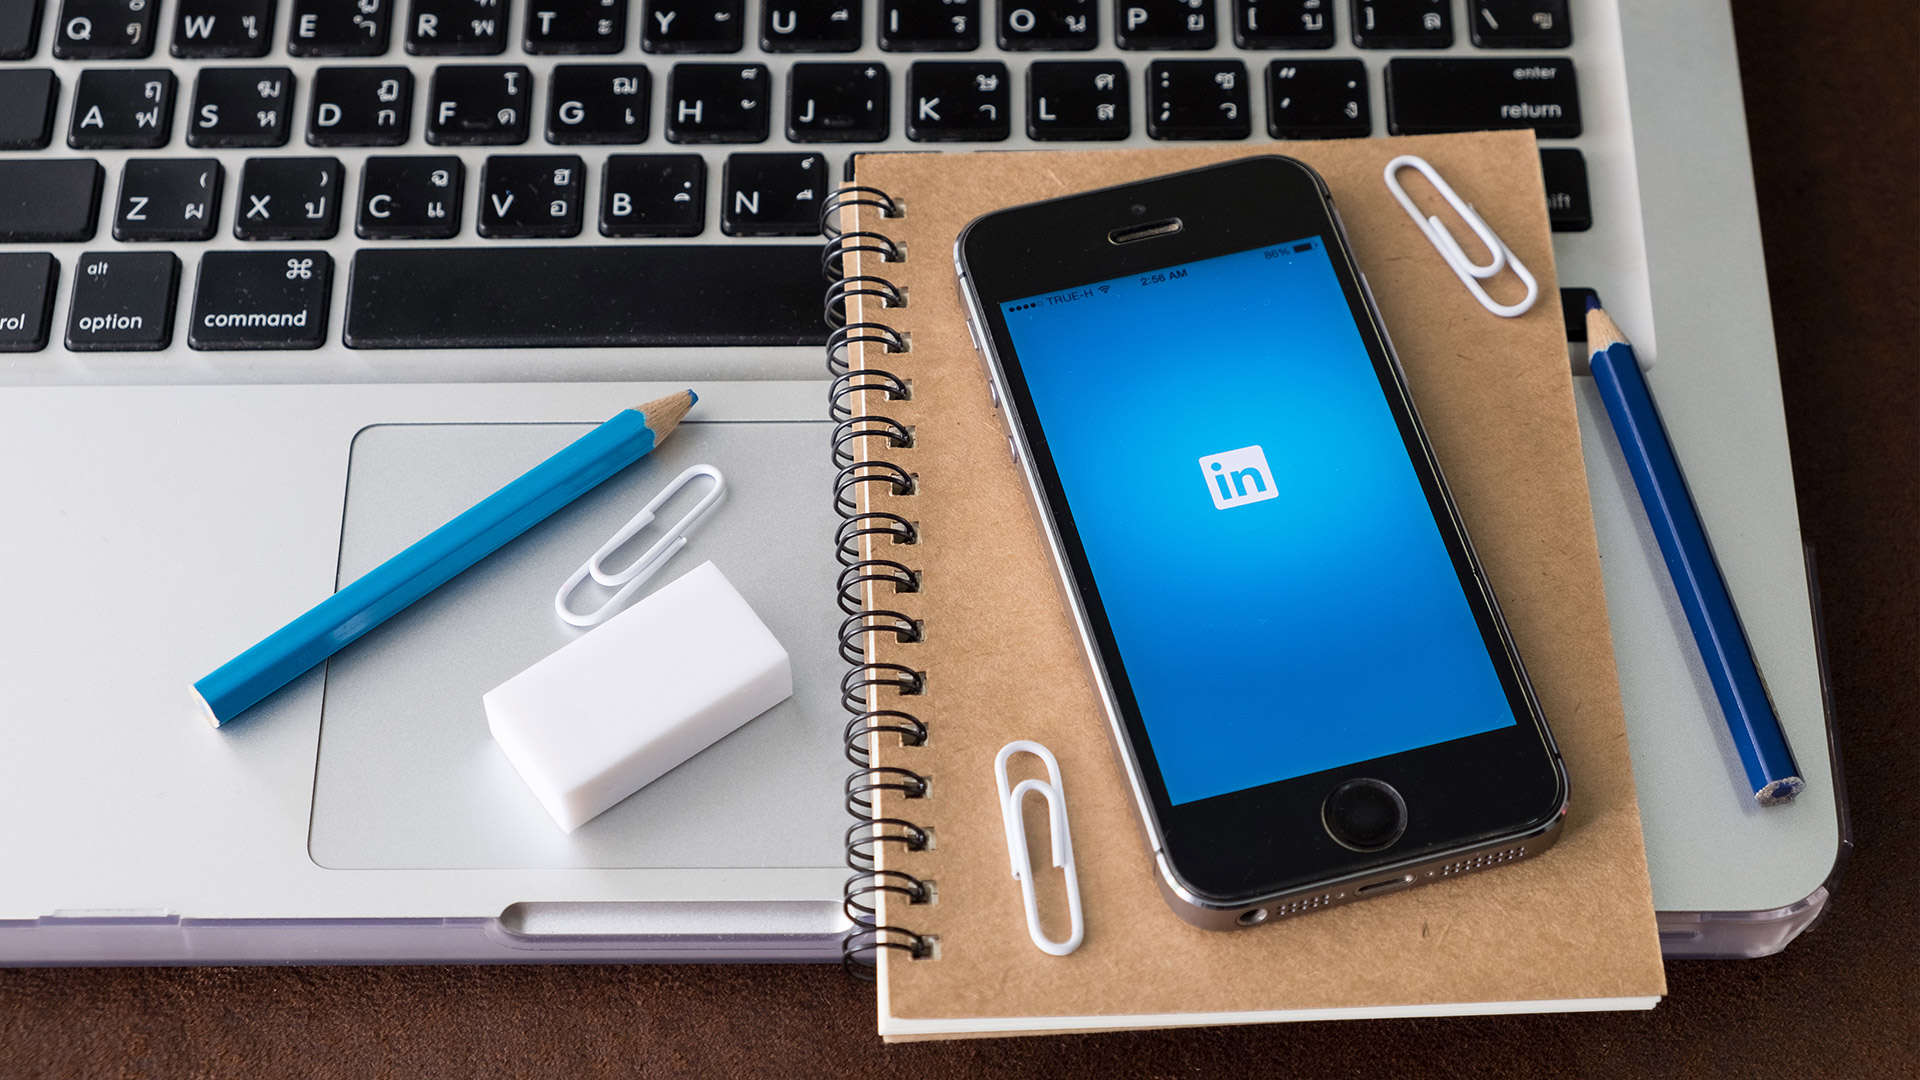 Personal Branding On Linkedin - Top 16 Tips And Tactics For Making An Impact